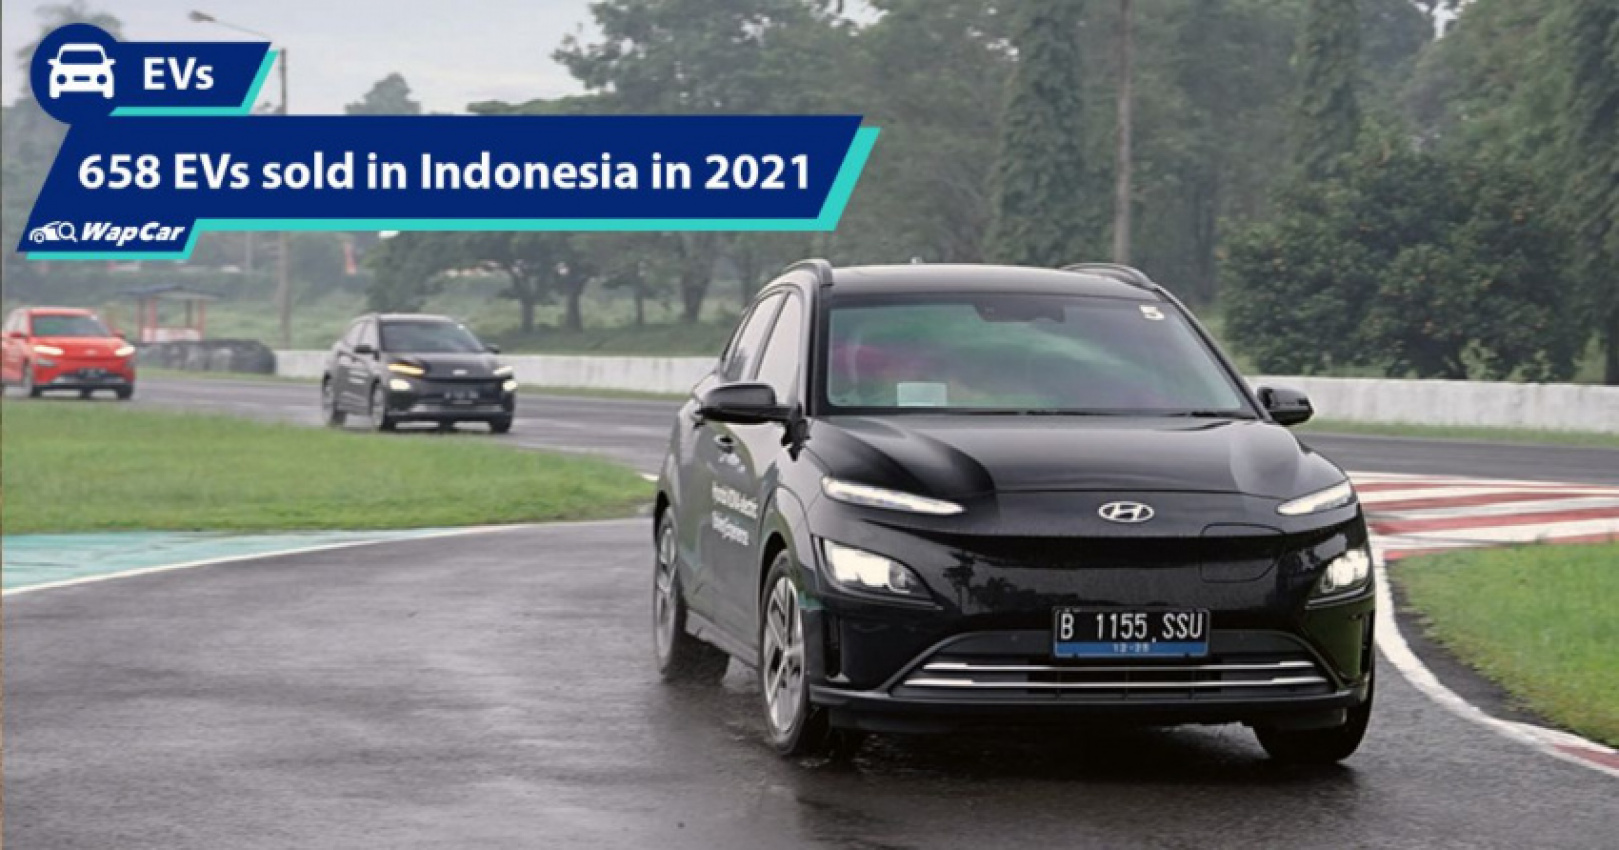 autos, cars, hyundai, while malaysia sold 274 evs in 2021, indonesia sold 2.5x more with hyundai leading